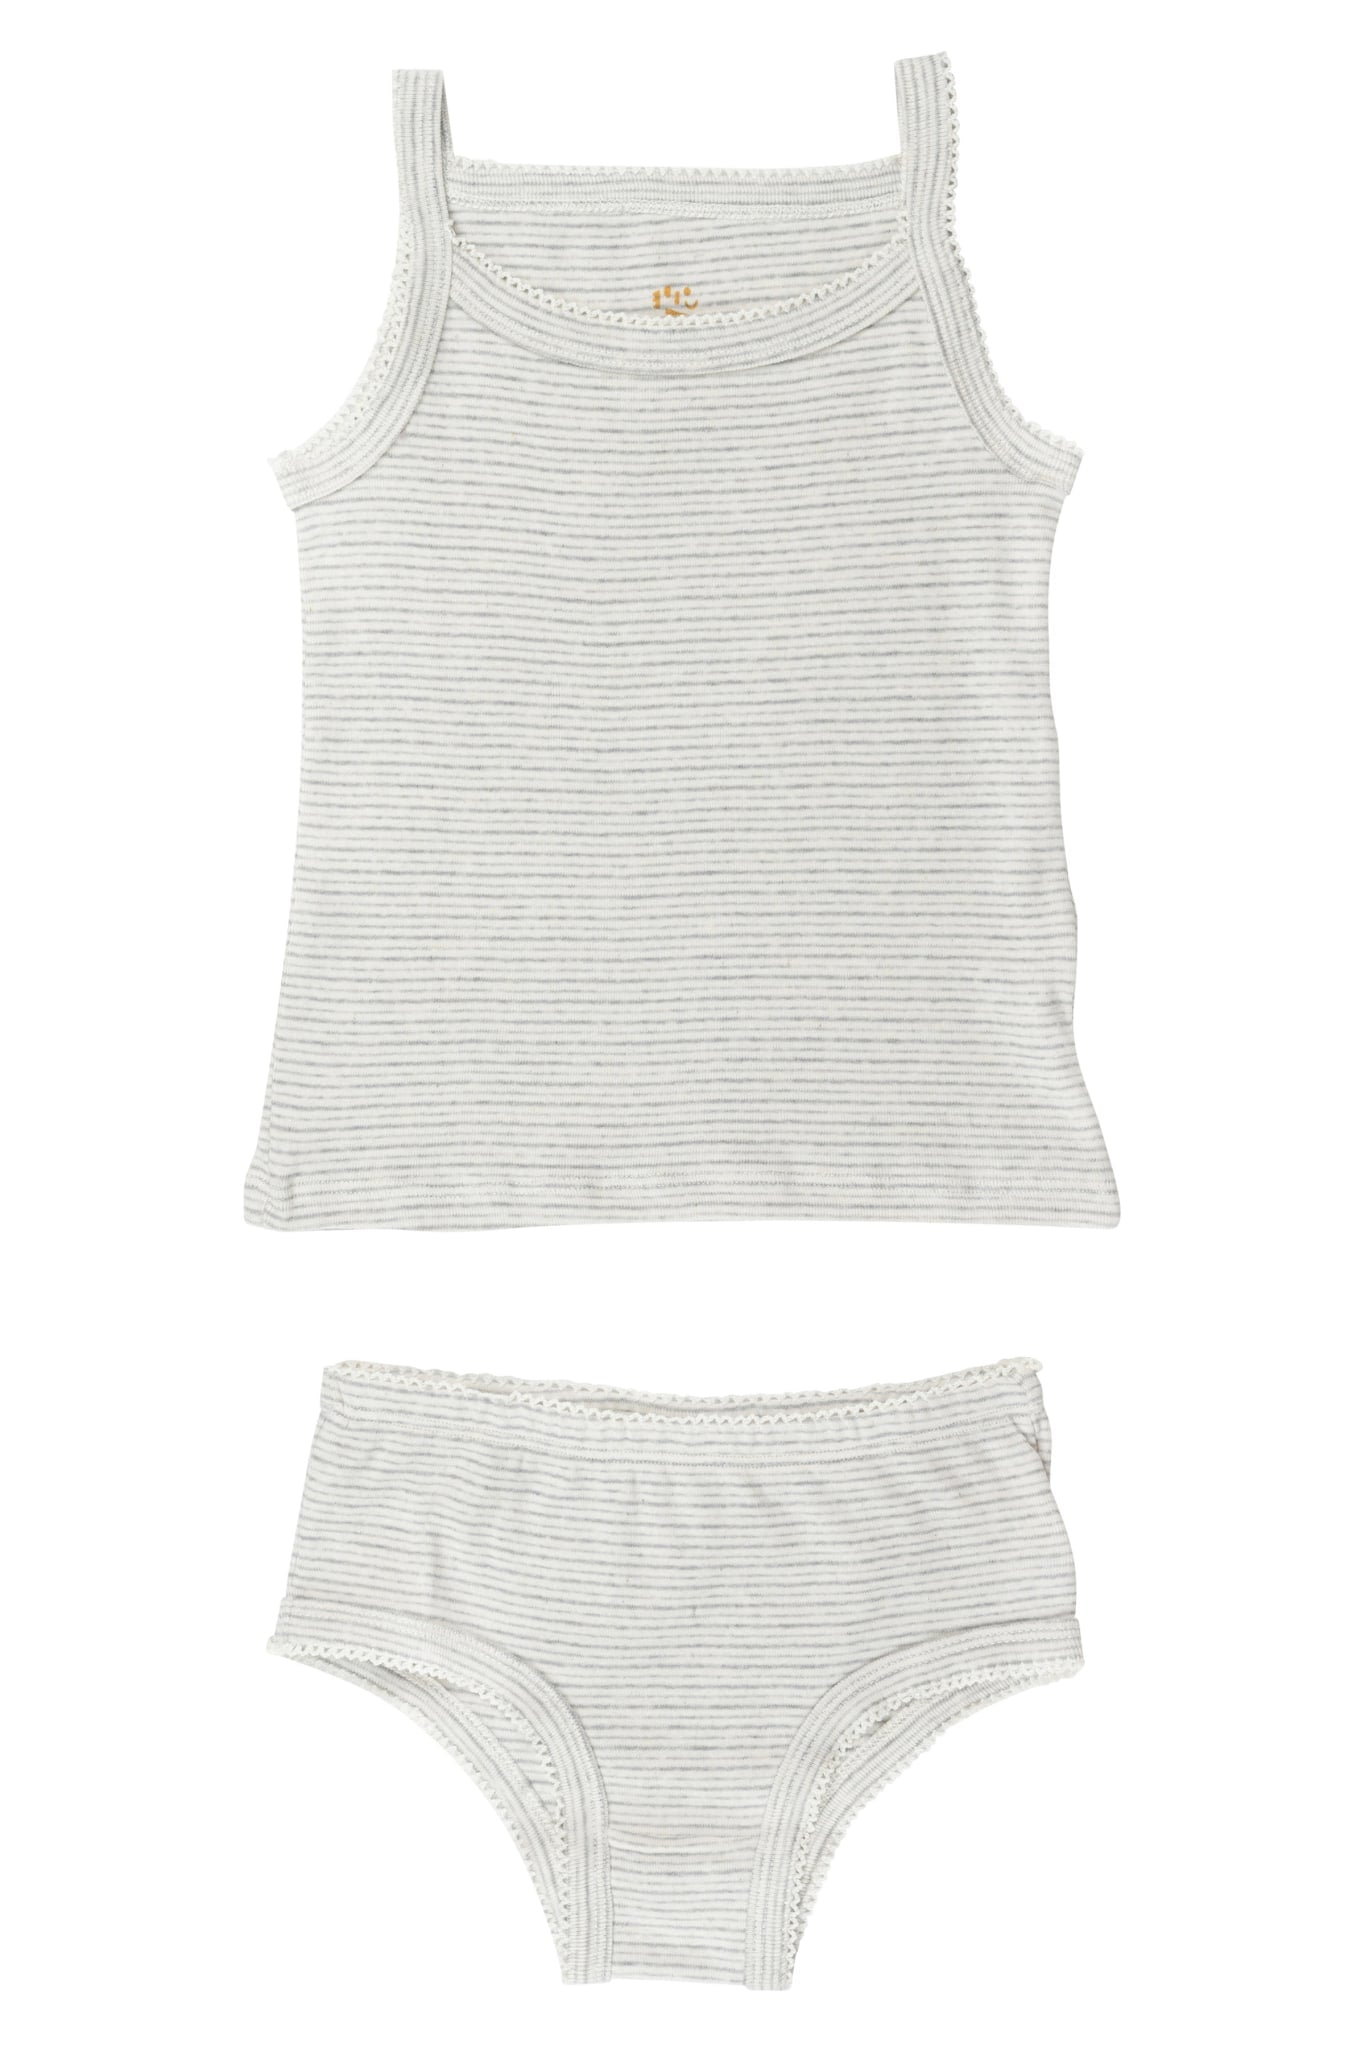 STRAP TOP AND UNDERPANTS STRIPED - GREY STRIPE